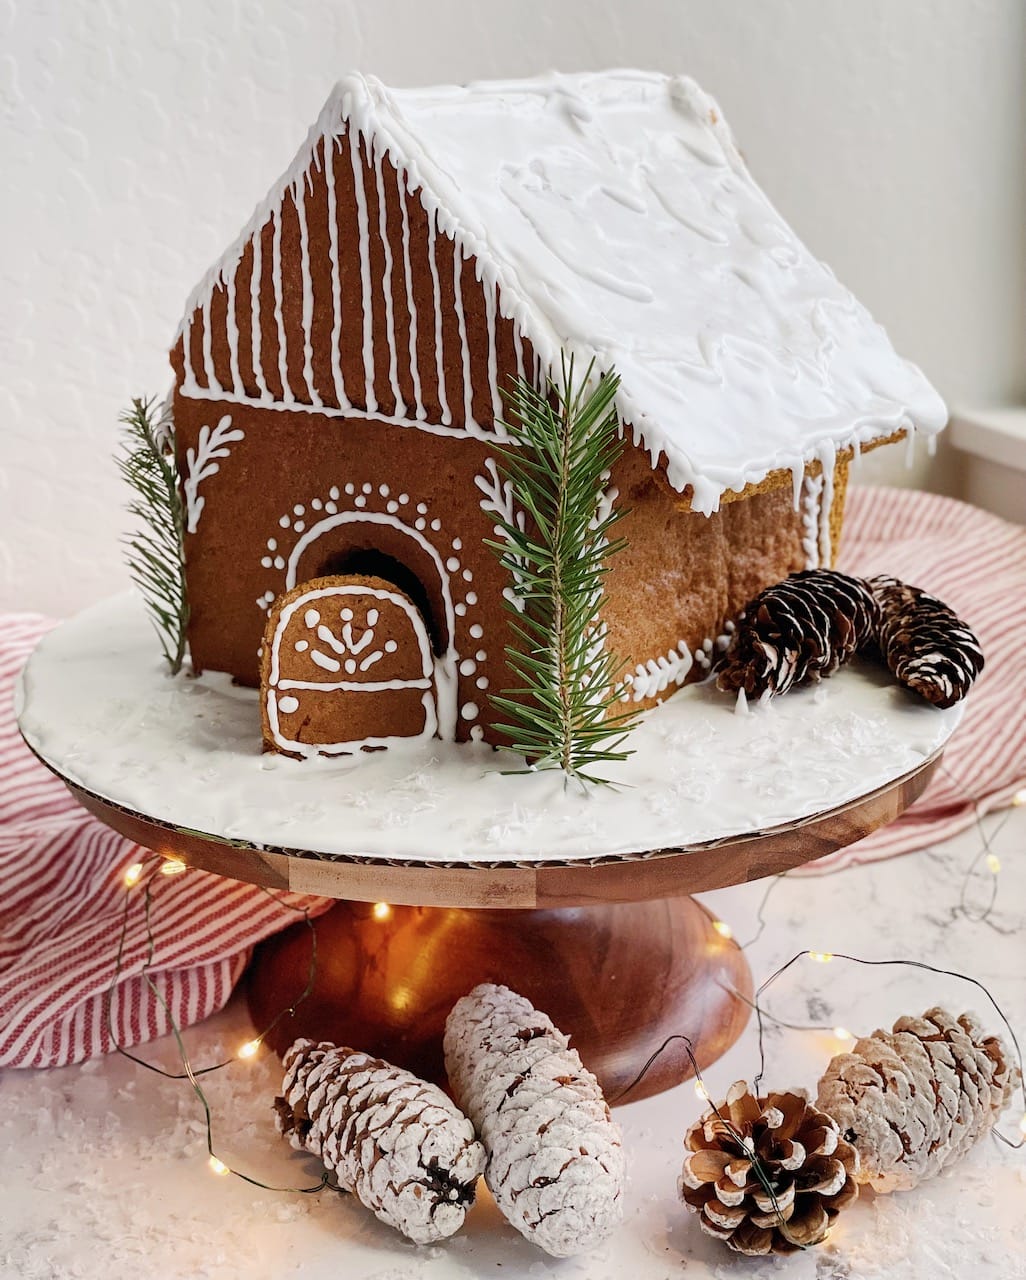 NYT Cooking - How to Make a Gingerbread House